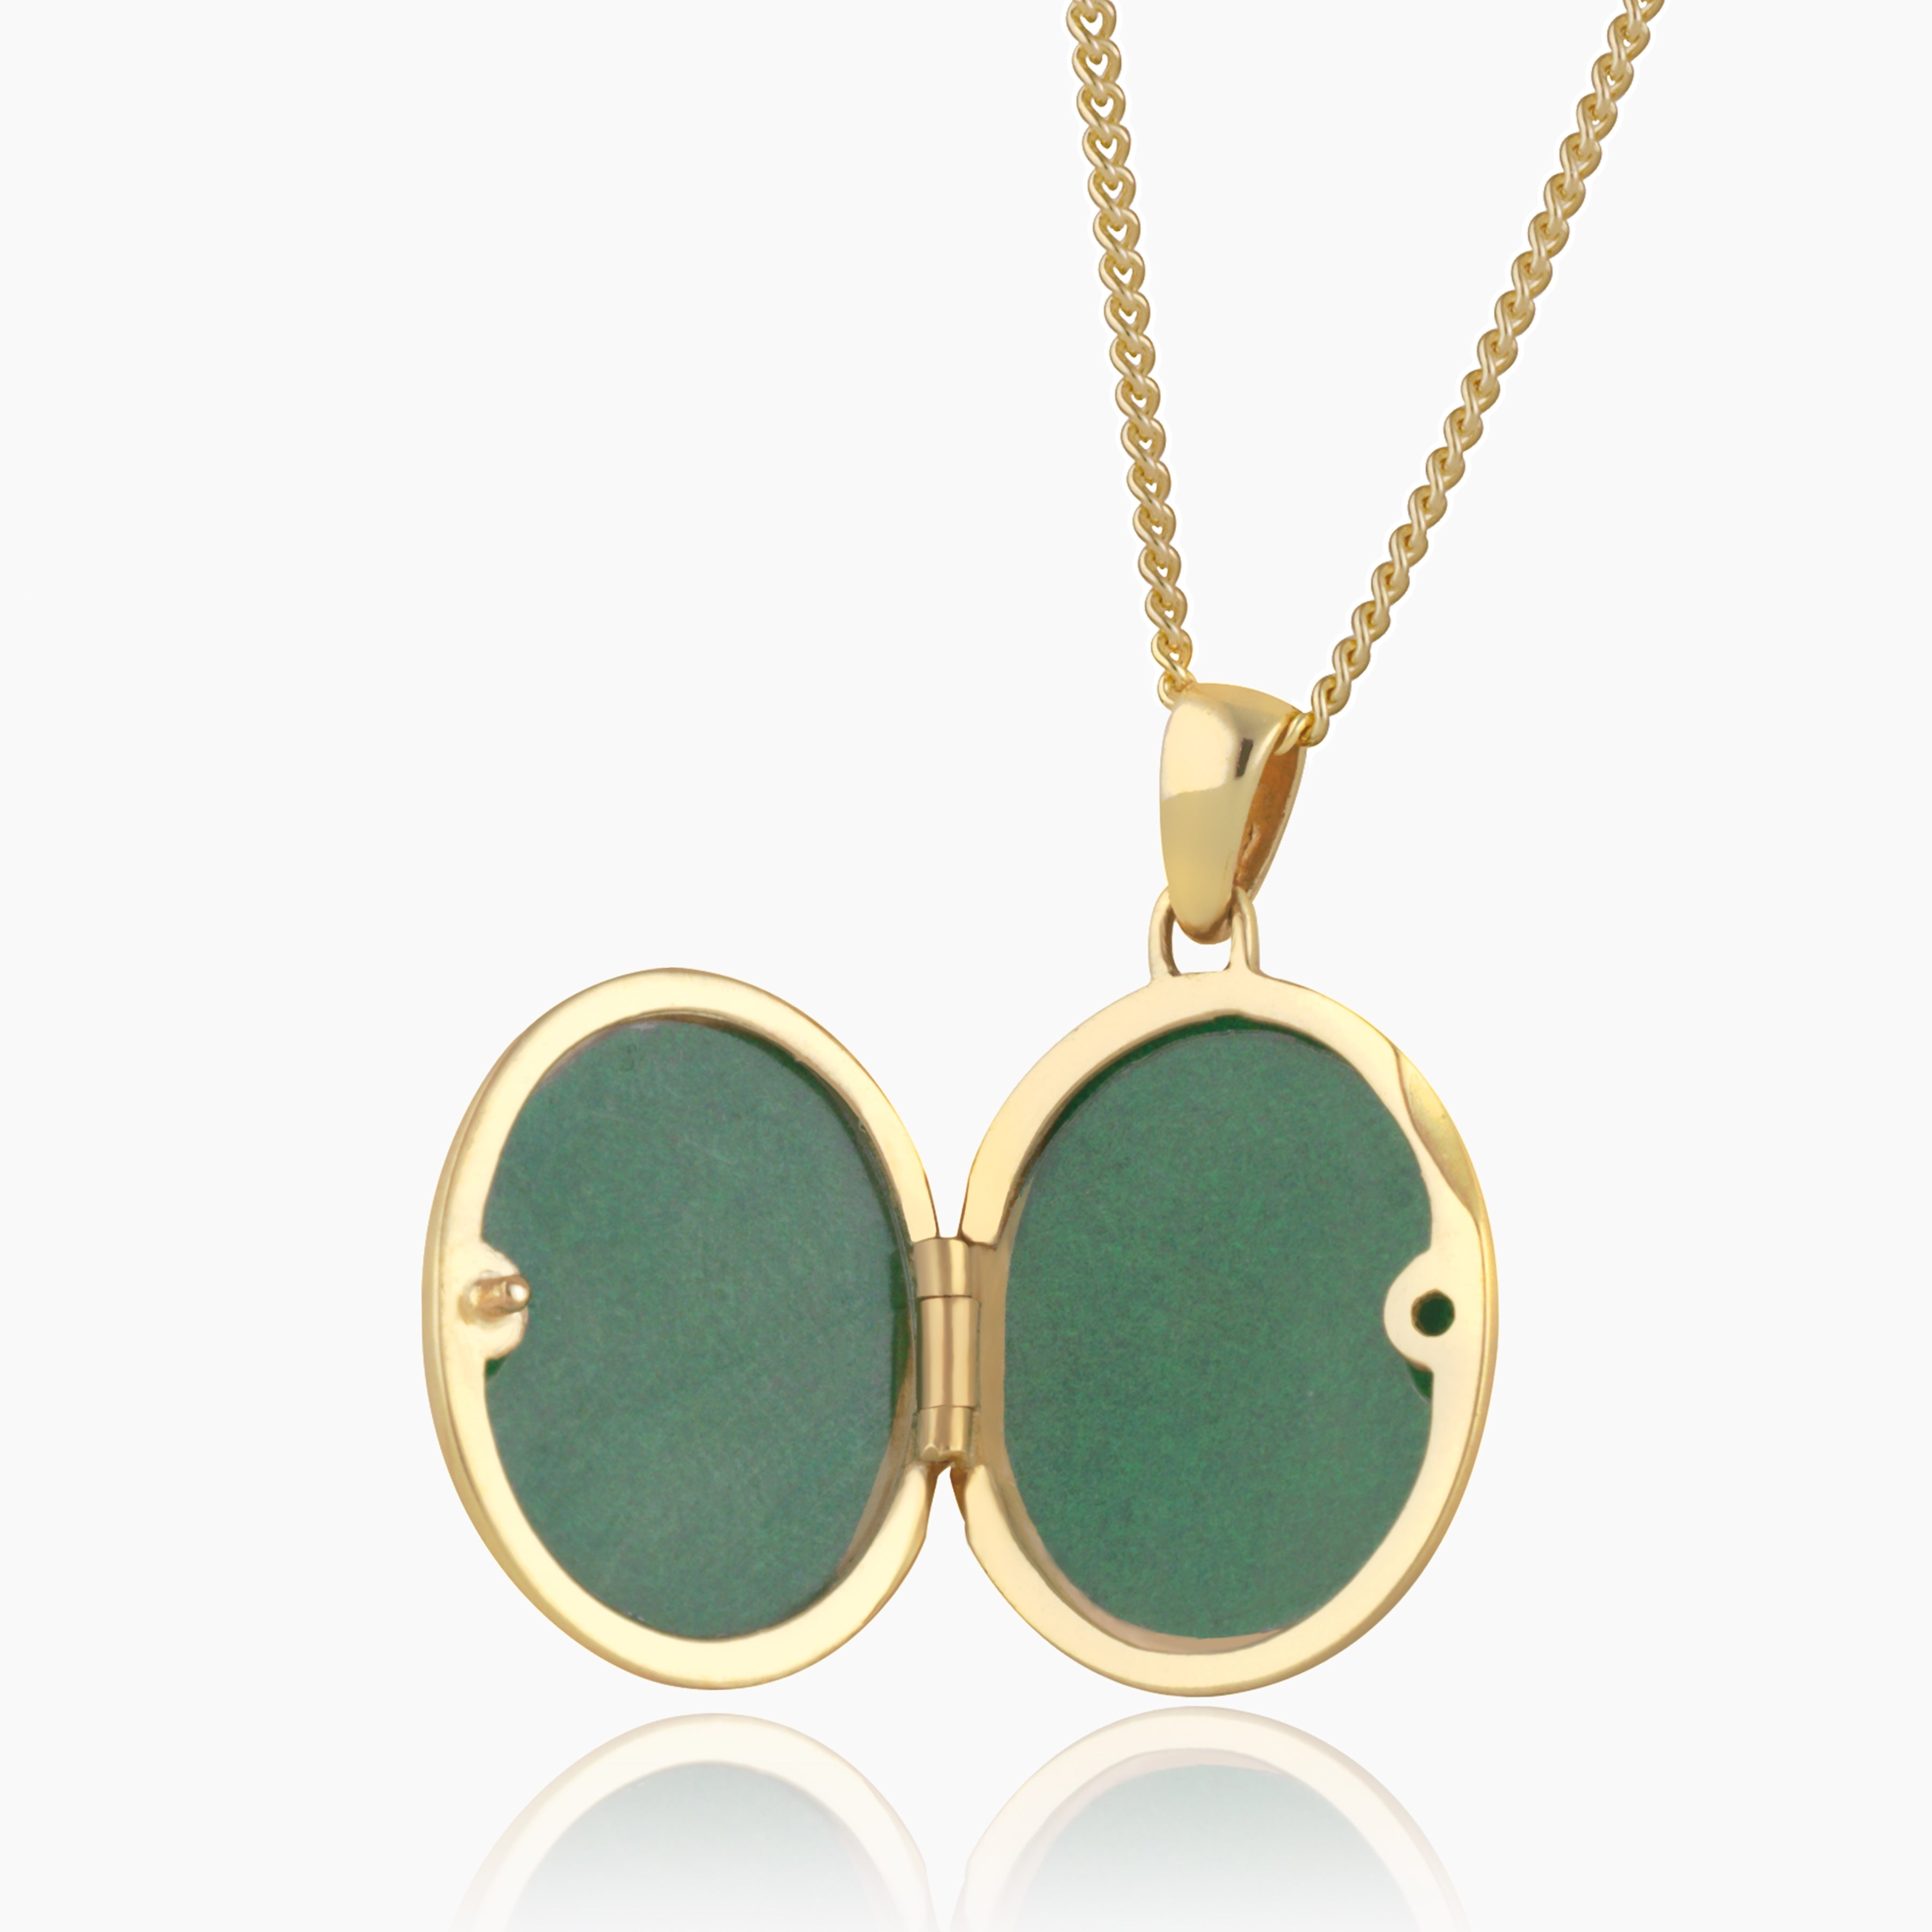 Product title: Hand Polished Gold Oval, product type: Locket